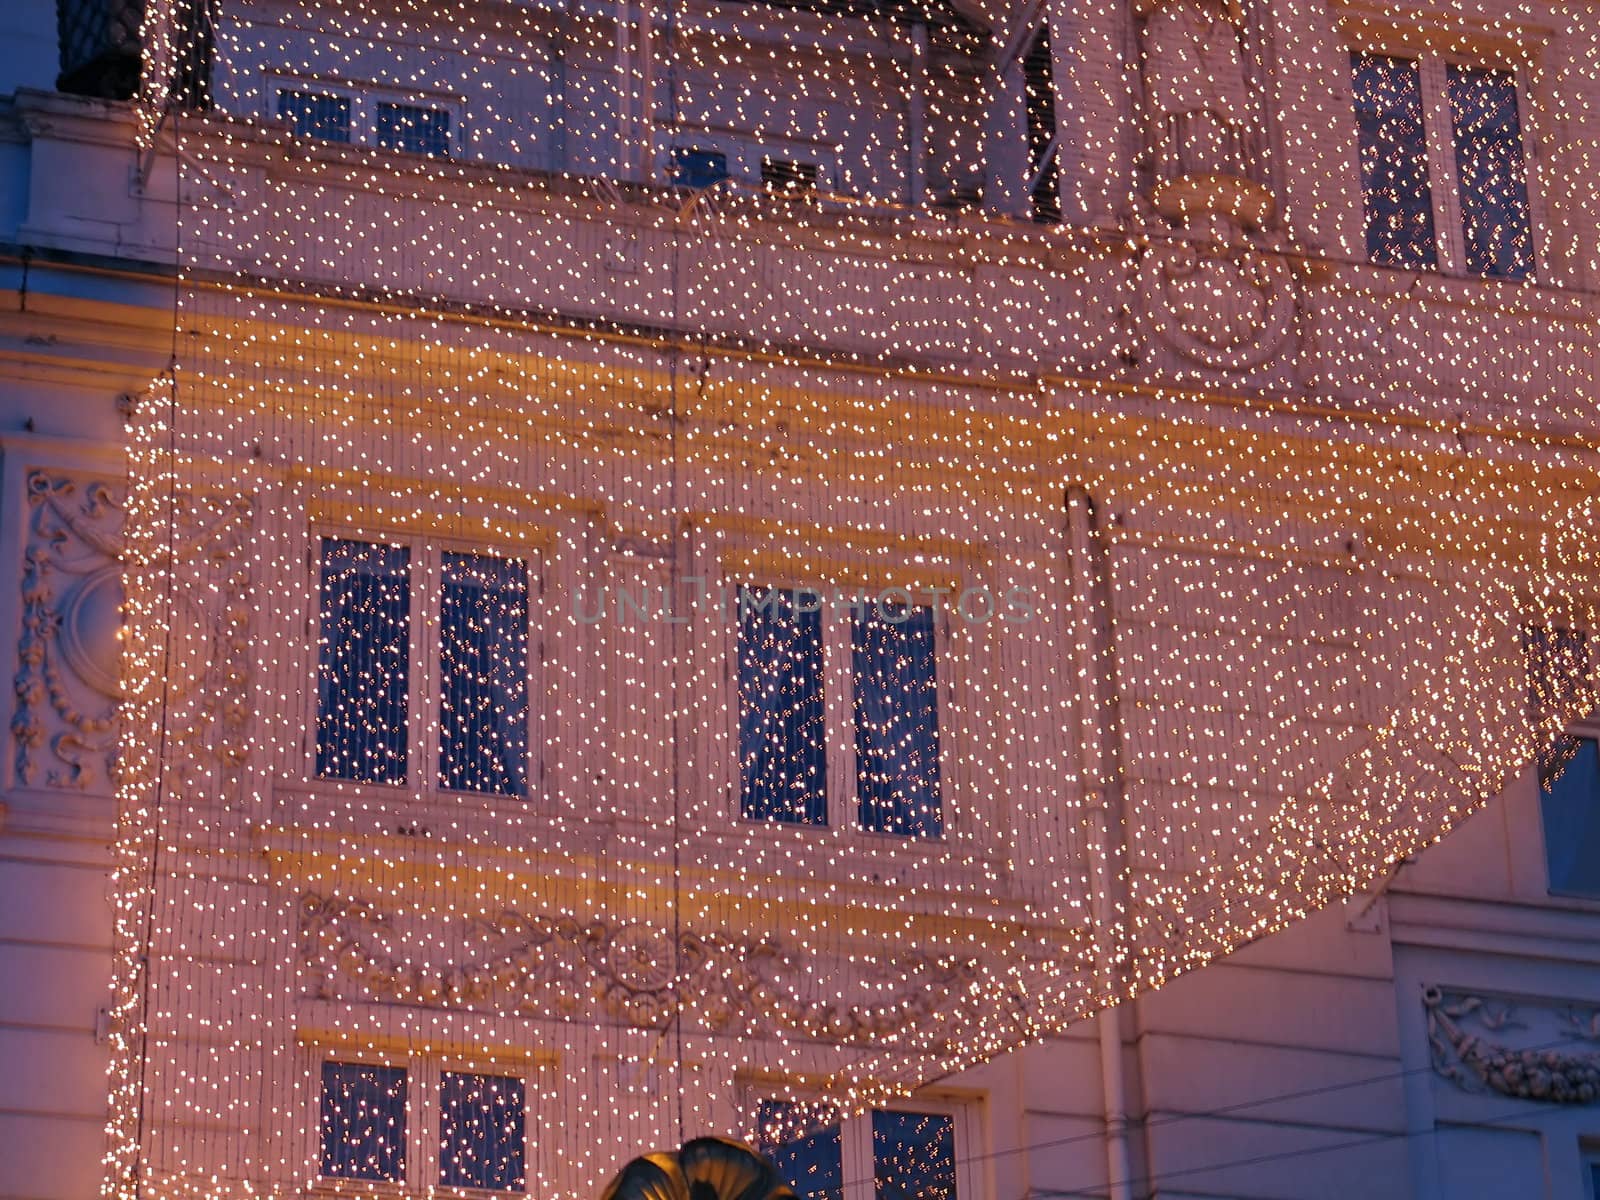 Carpet of lamps decorate a building for the new year celebrations